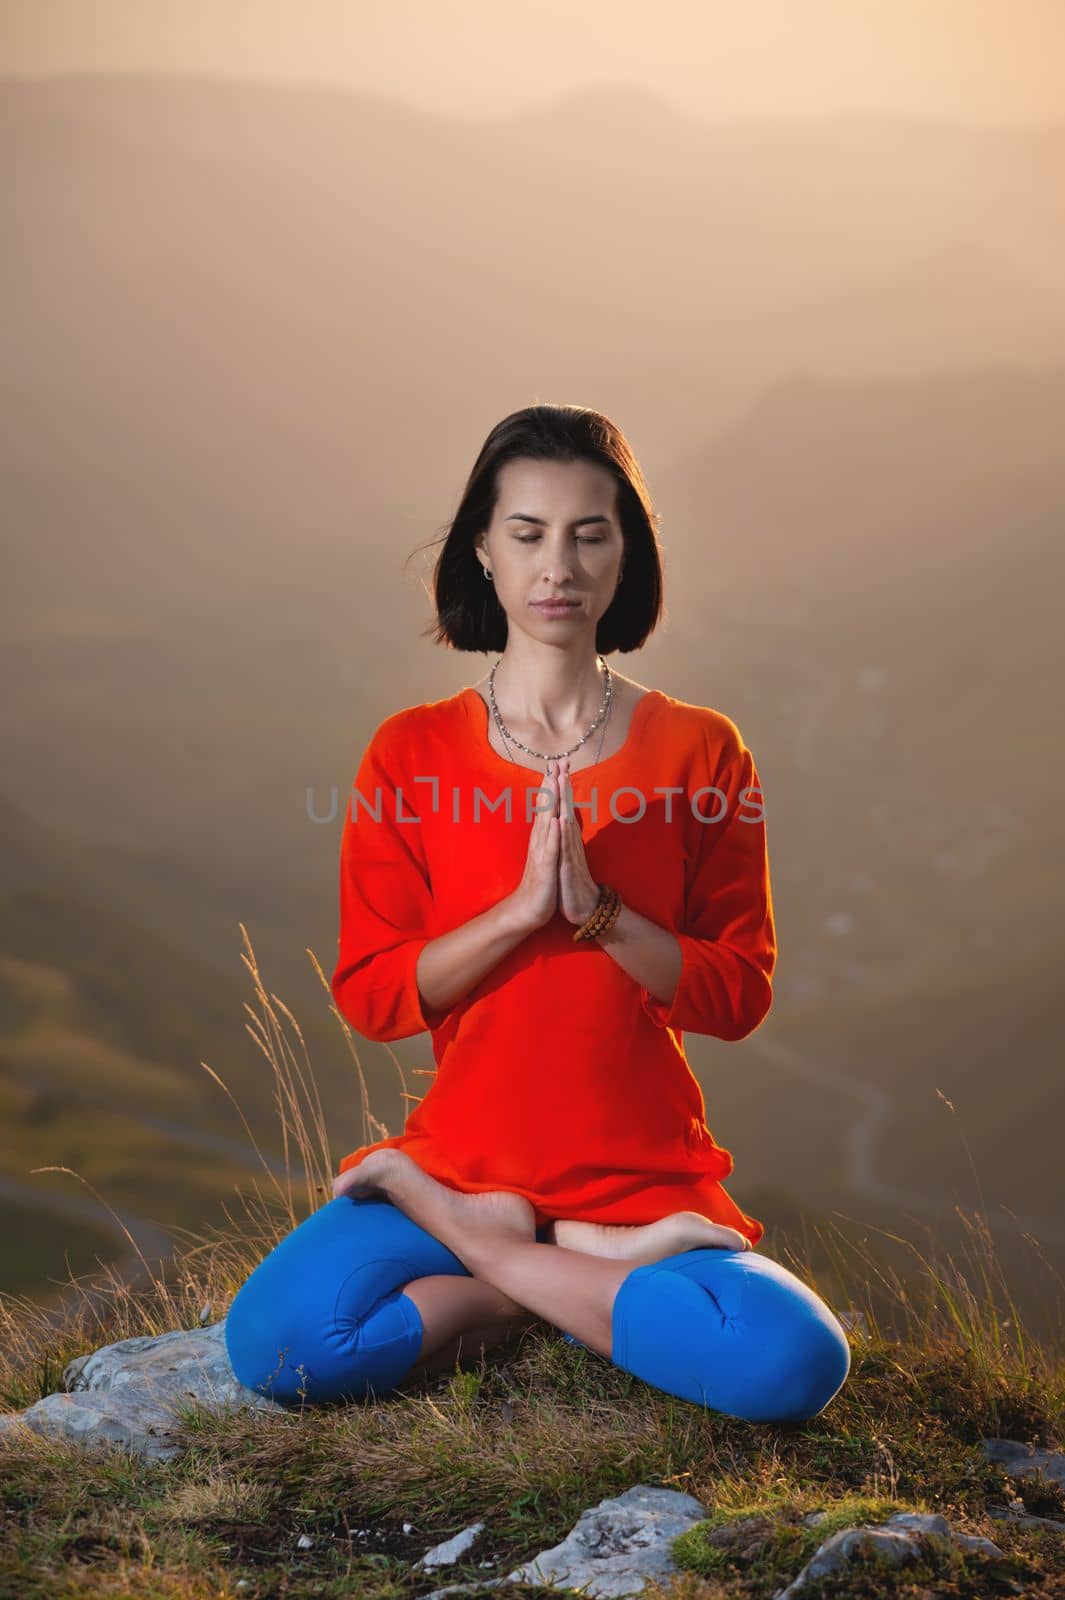 young caucasian woman meditates in the lotus position in the grass in the mountains near the cliff in the setting sun.